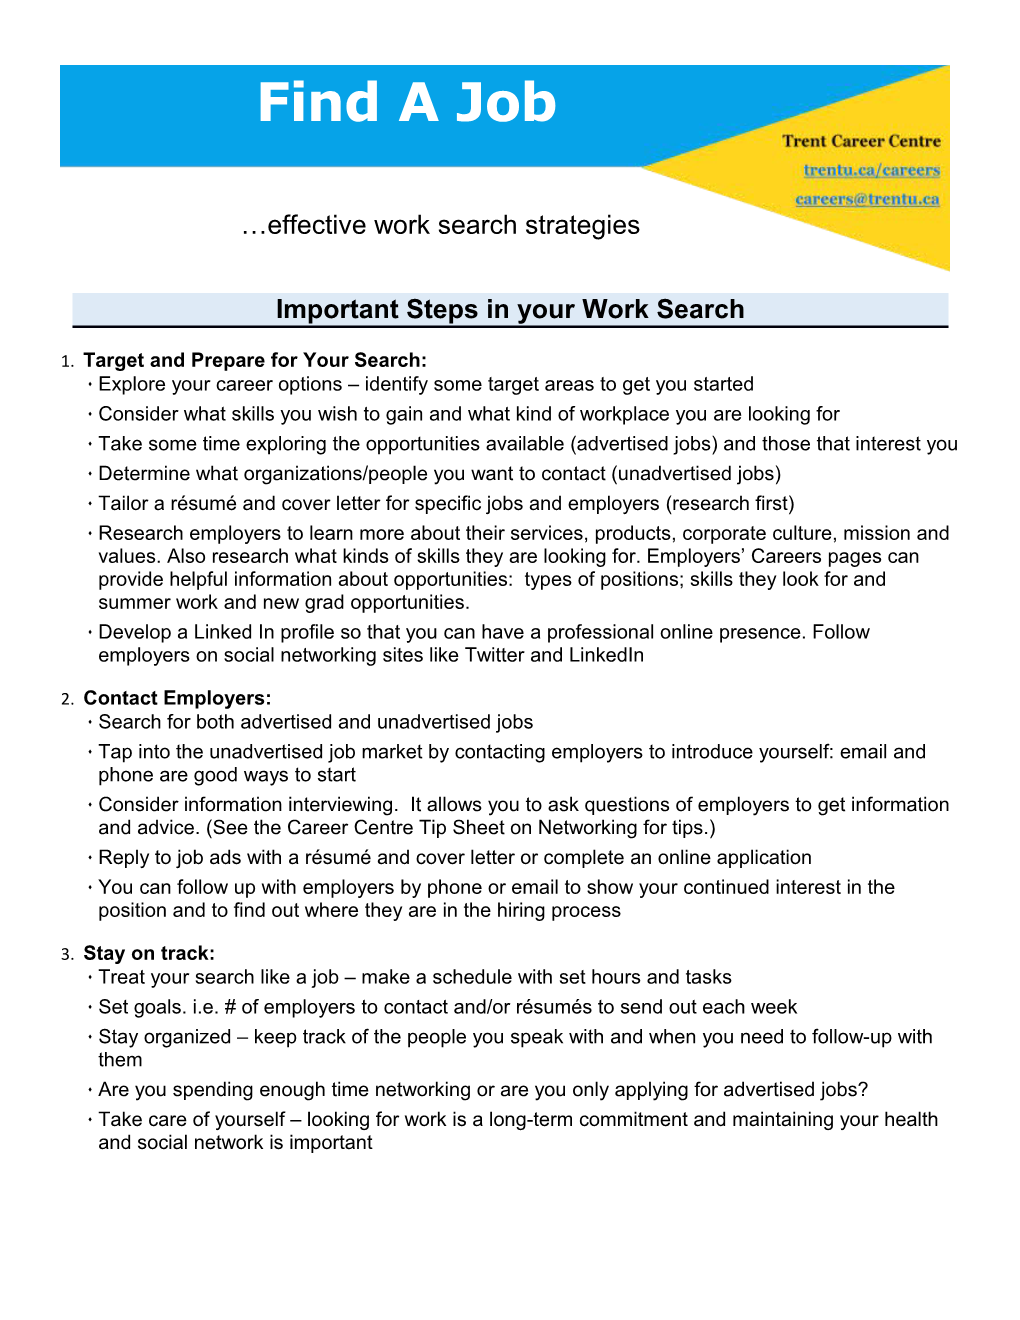 Important Steps in Your Work Search